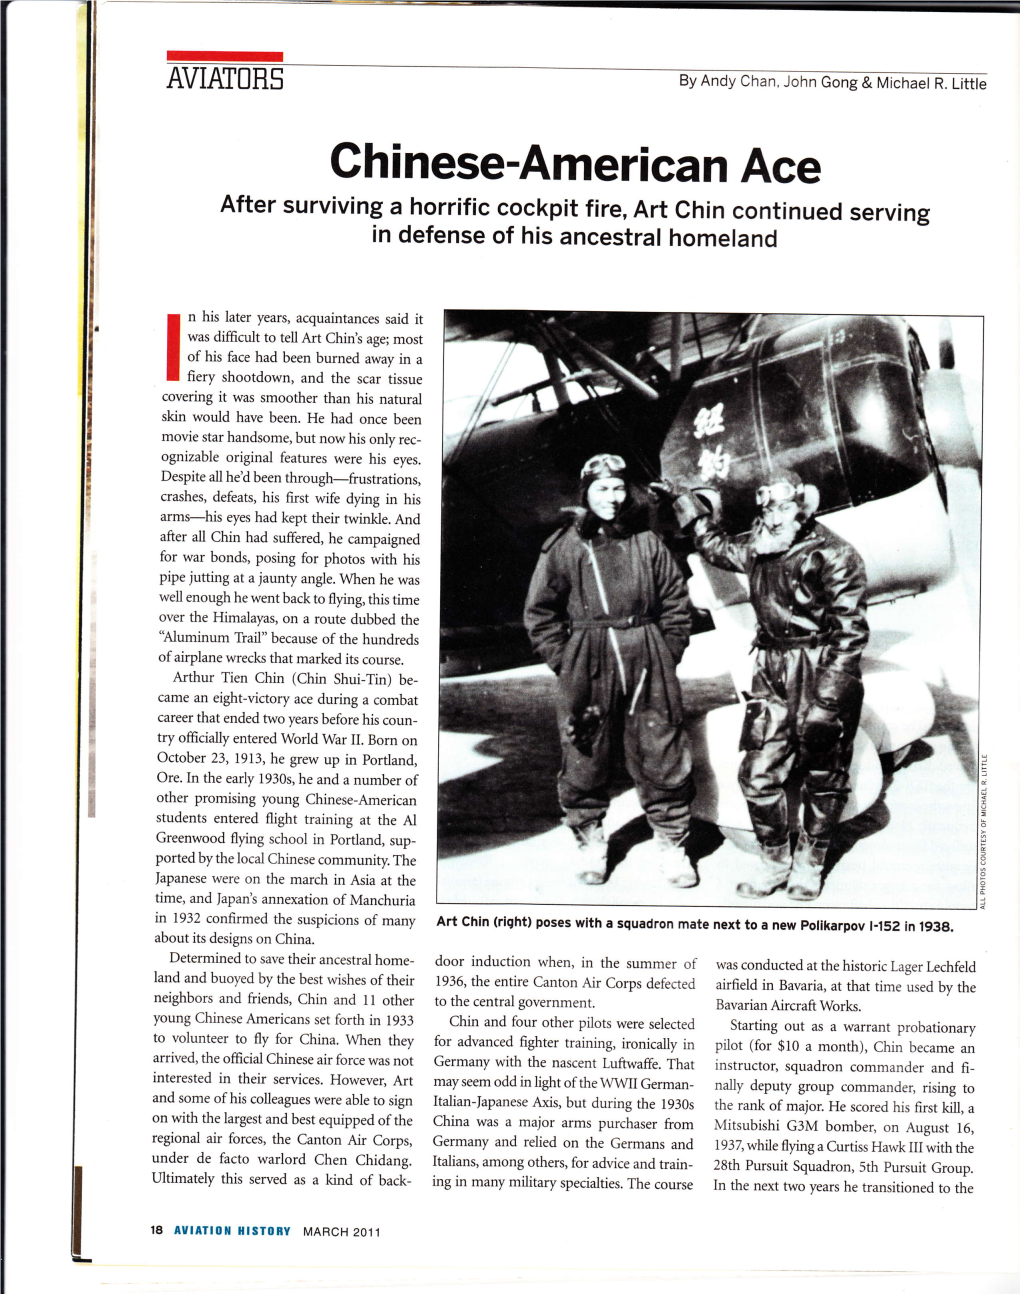 Ghinese-American Ace After Surviving a Horrific Cockpit Fire, Art Chin Continued Serving in Defense of His Ancestral Homeland